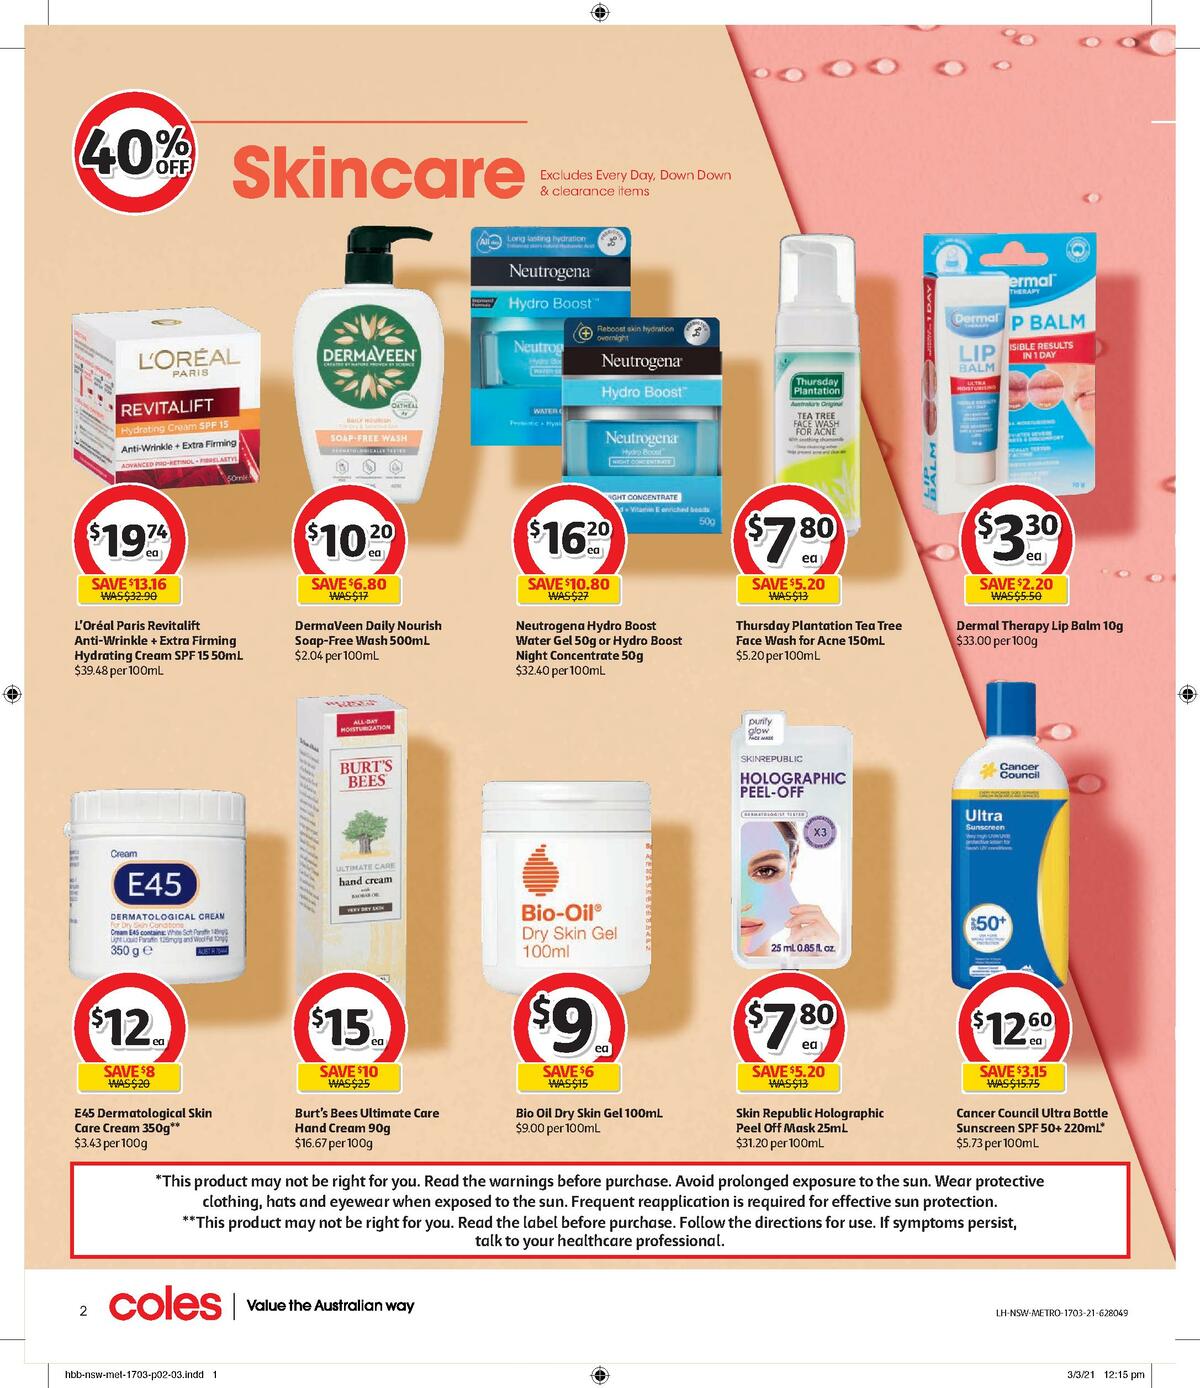 Coles Health & Beauty Catalogues from 17 March